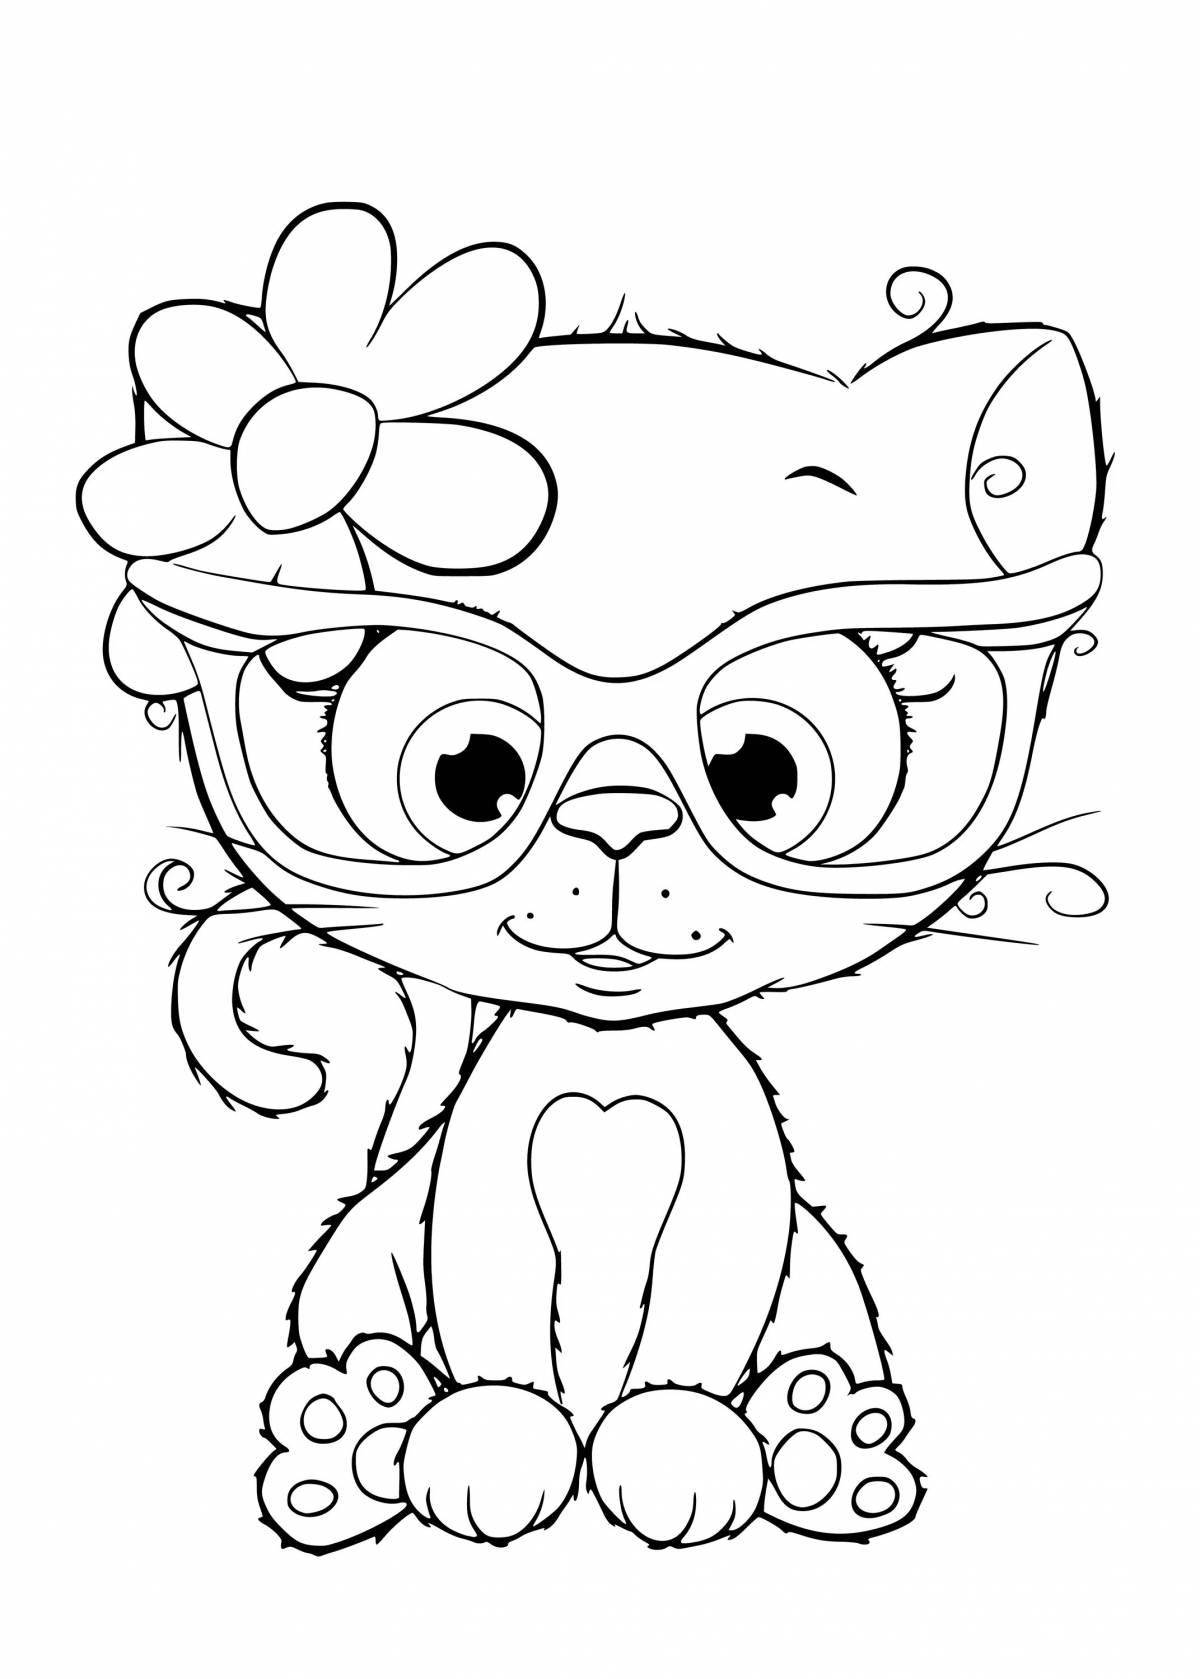 Cute and cozy kitten coloring book